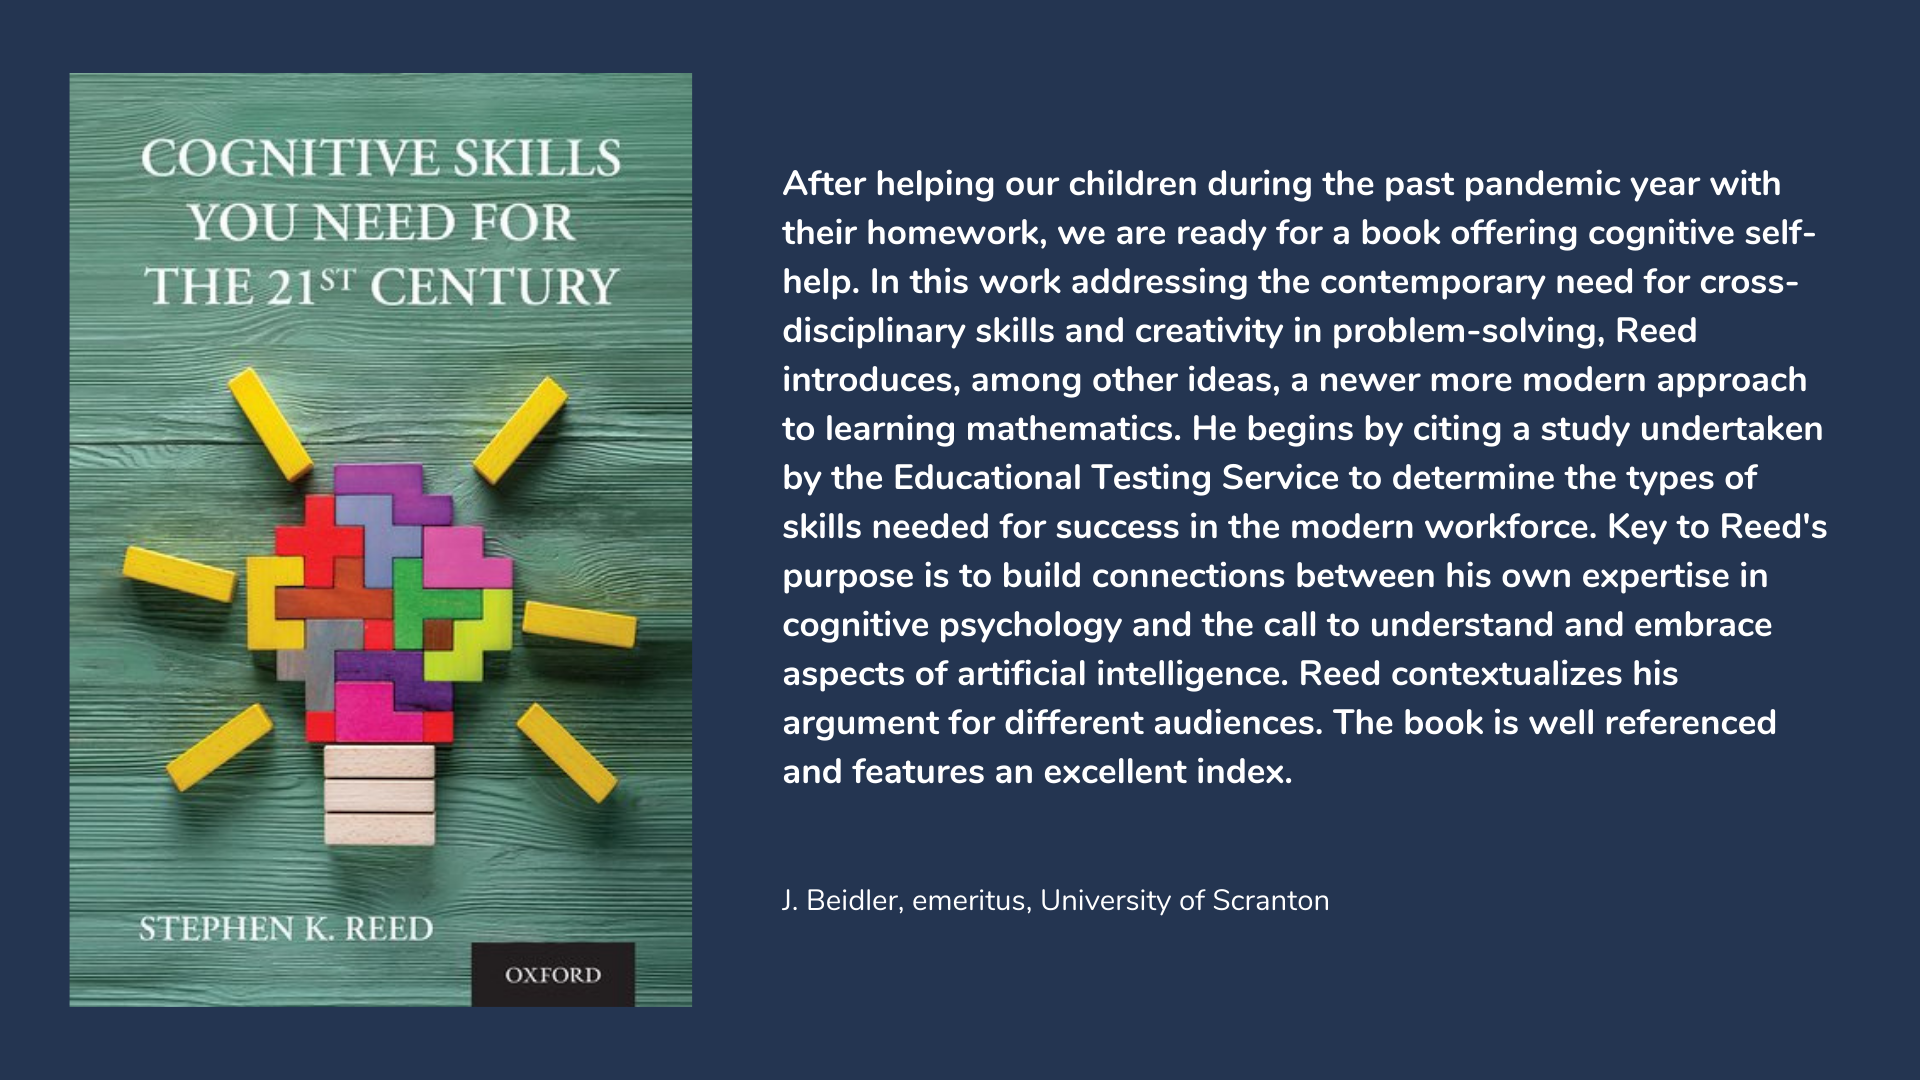 Cognitive Skills You Need for the 21st Century, book cover and description.